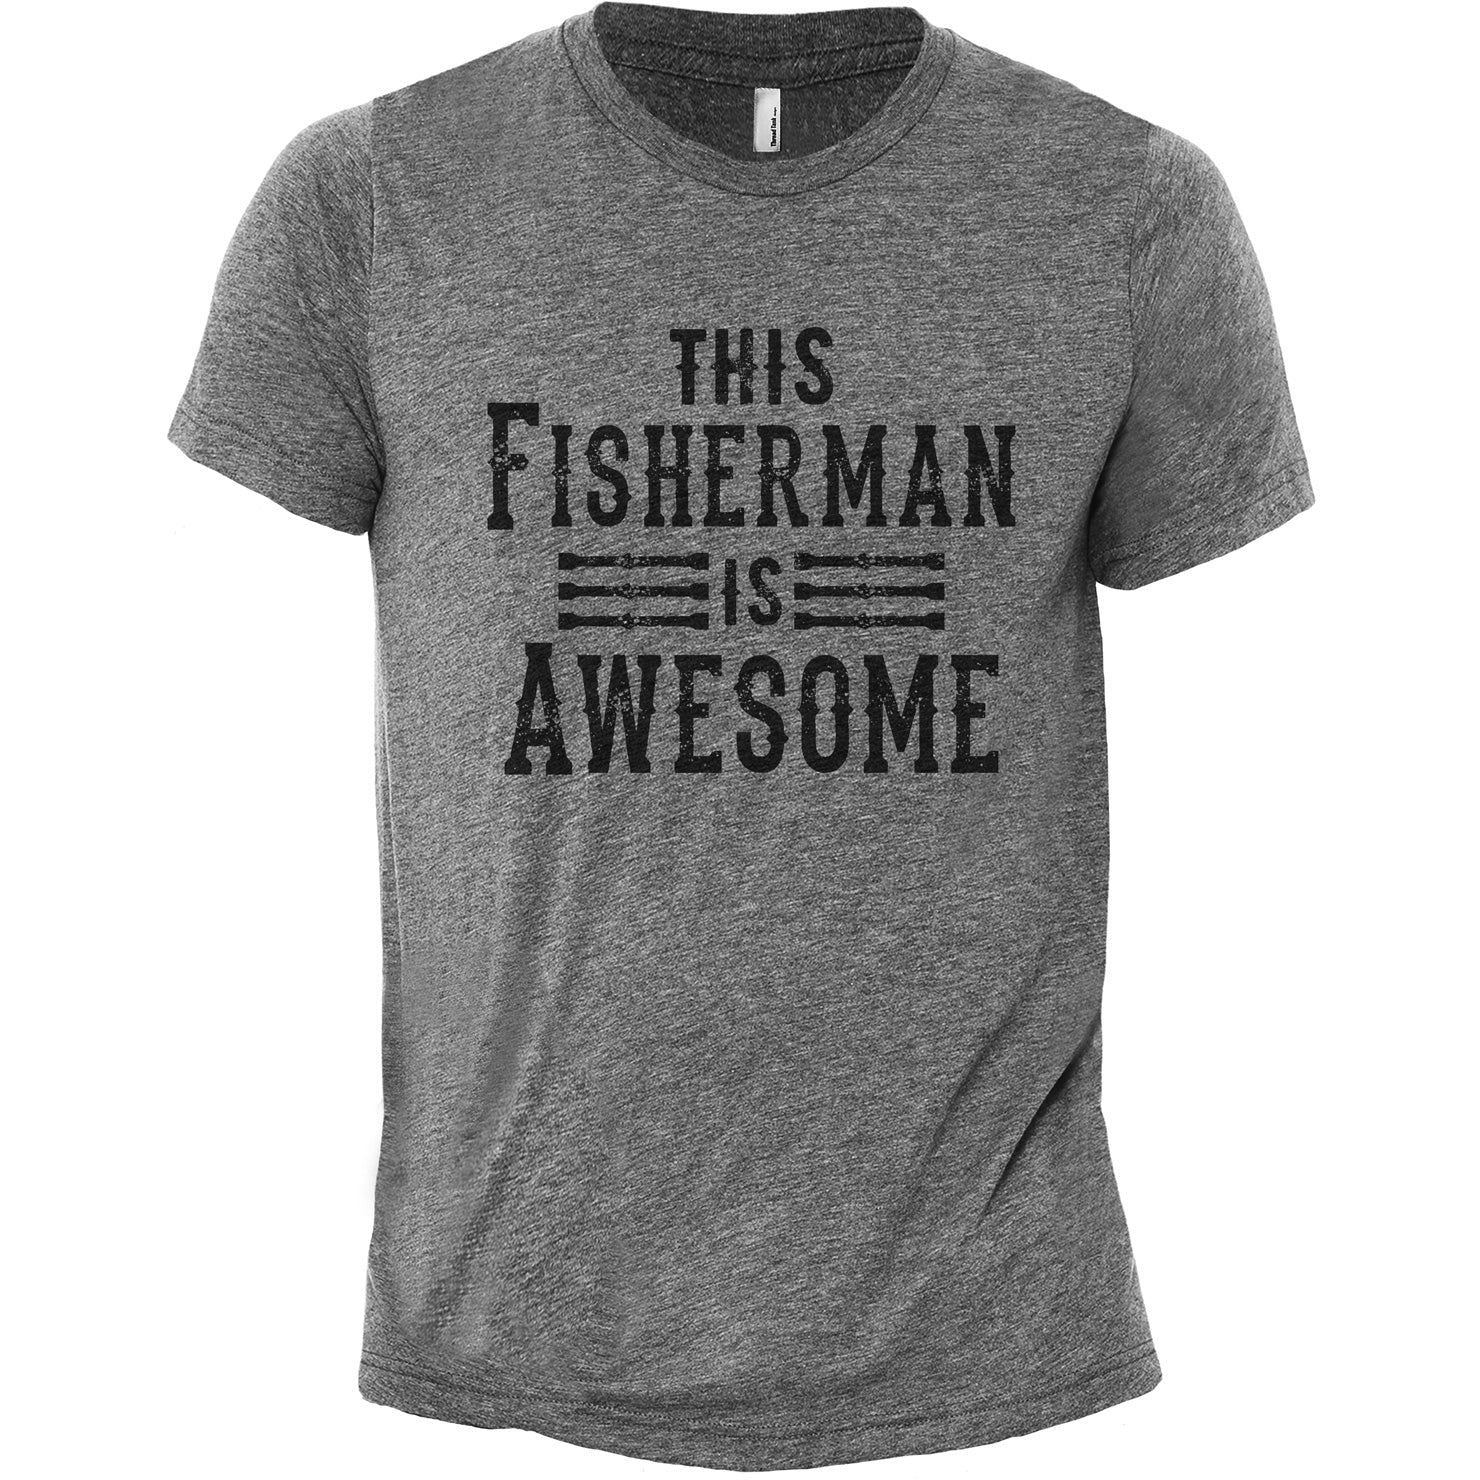 This Fisherman Is Awesome - Stories You Can Wear